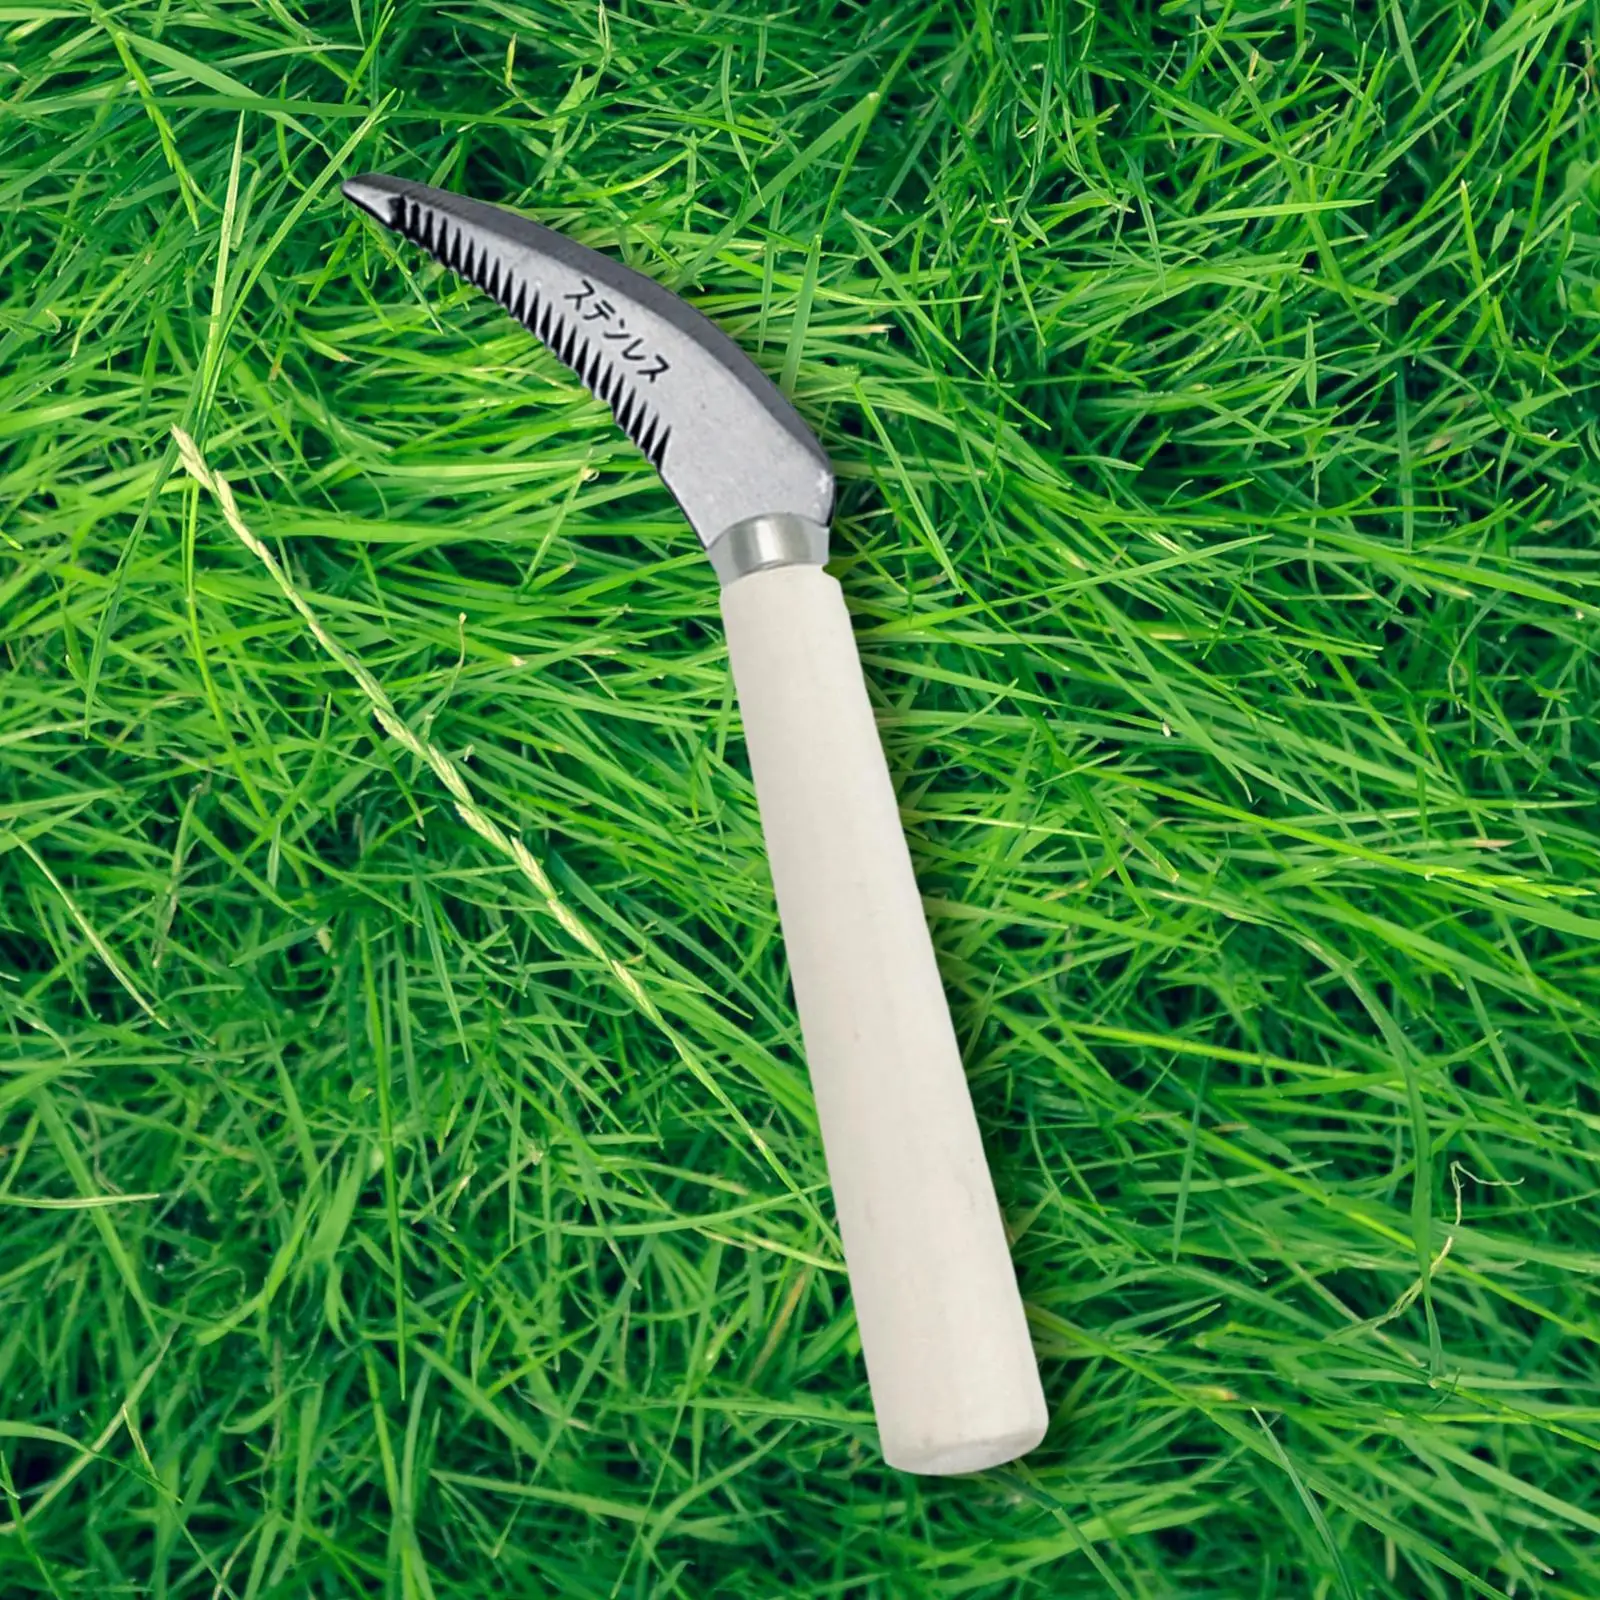 Weeding Sickle with Short Handle Portable Stainless Steel Weeding Sickle Grass Cutter Knife for Lawn Yard Terrace Sidewalk Deck